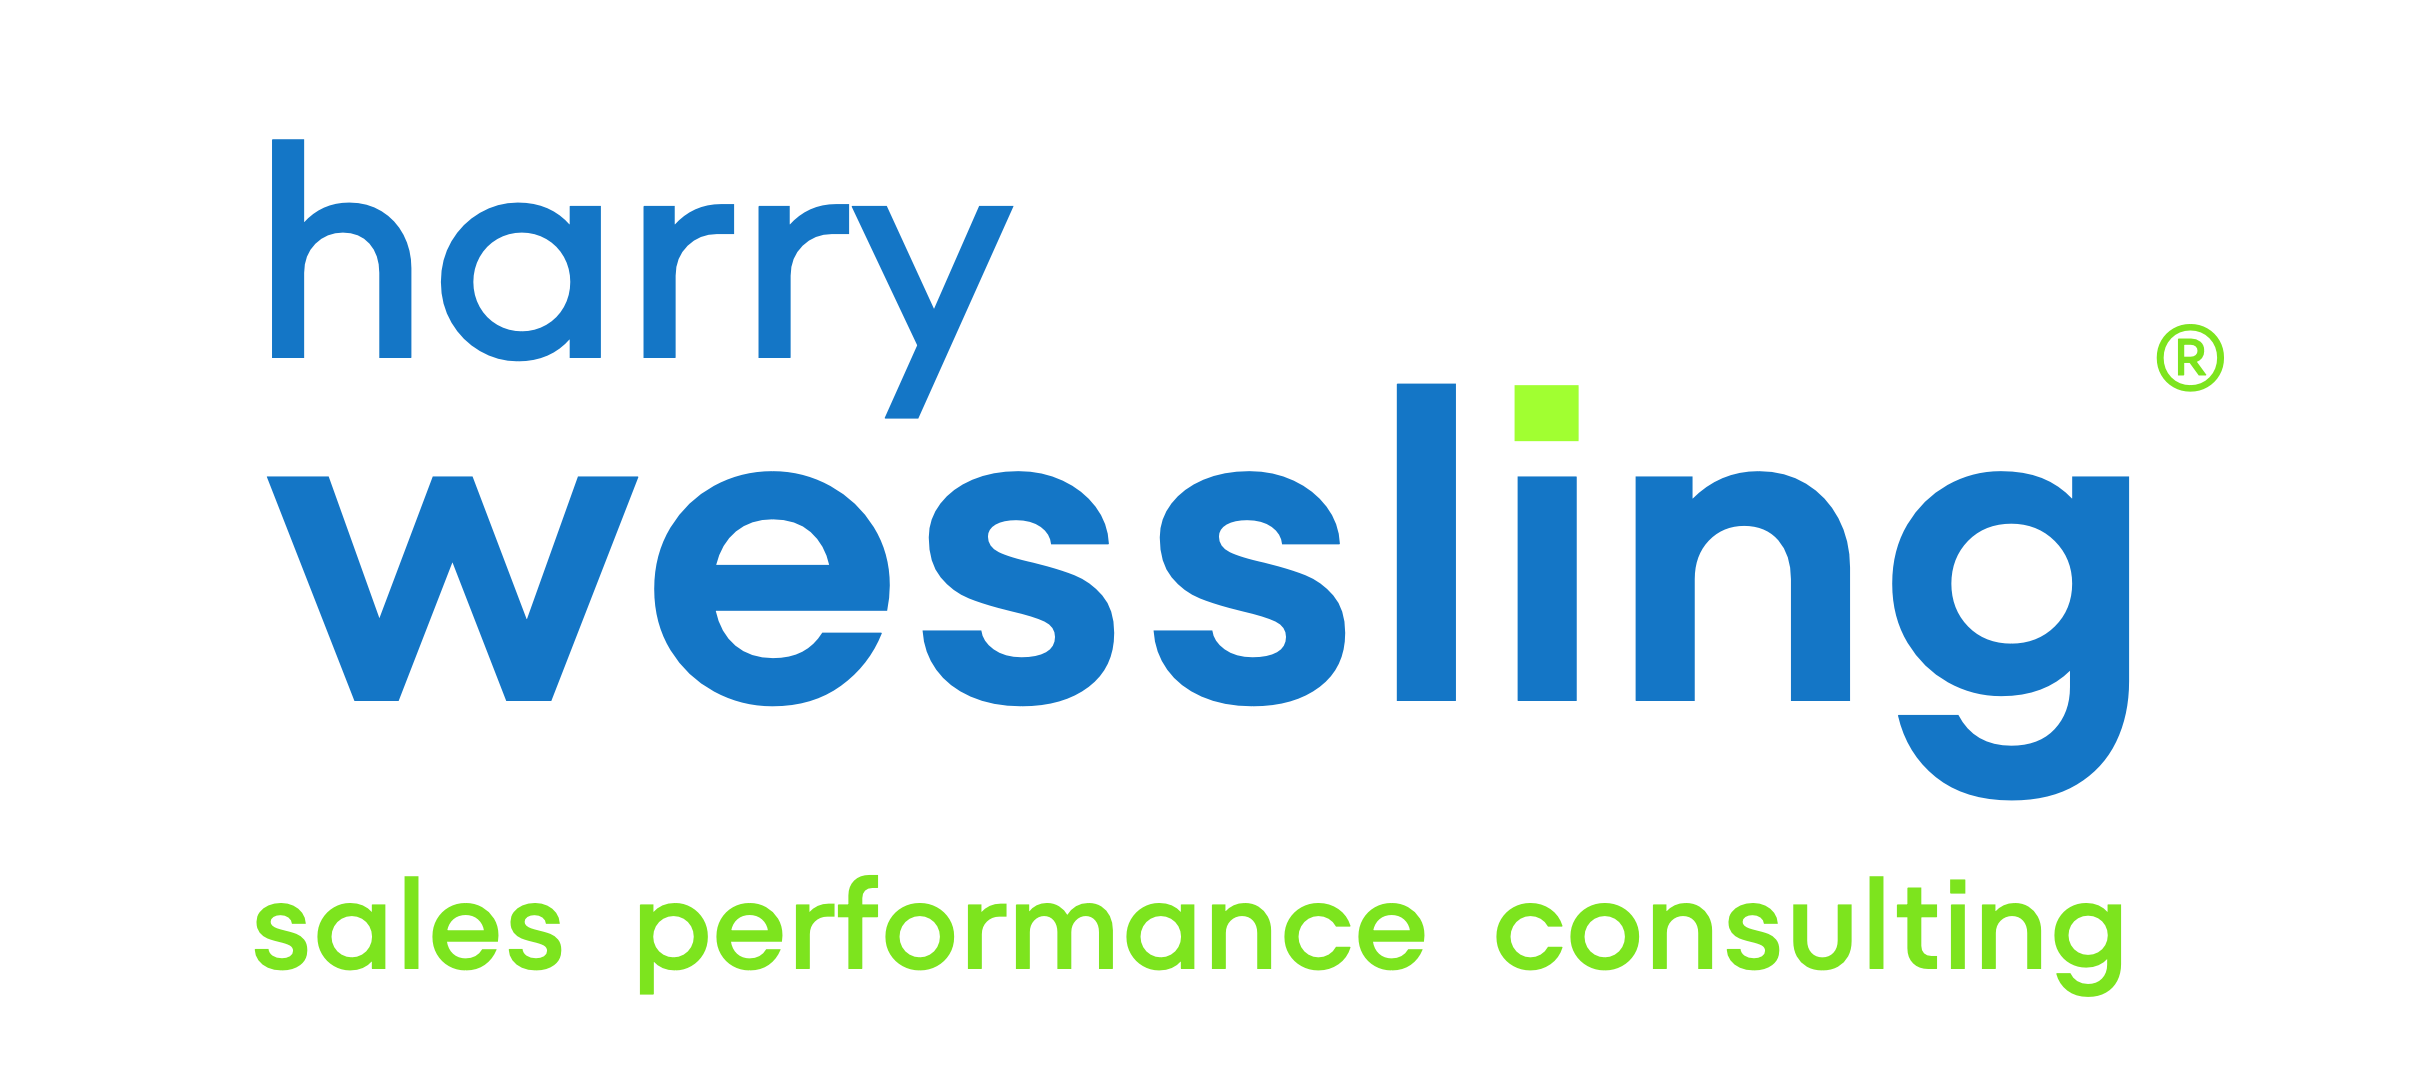 harry wessling sales performance consulting